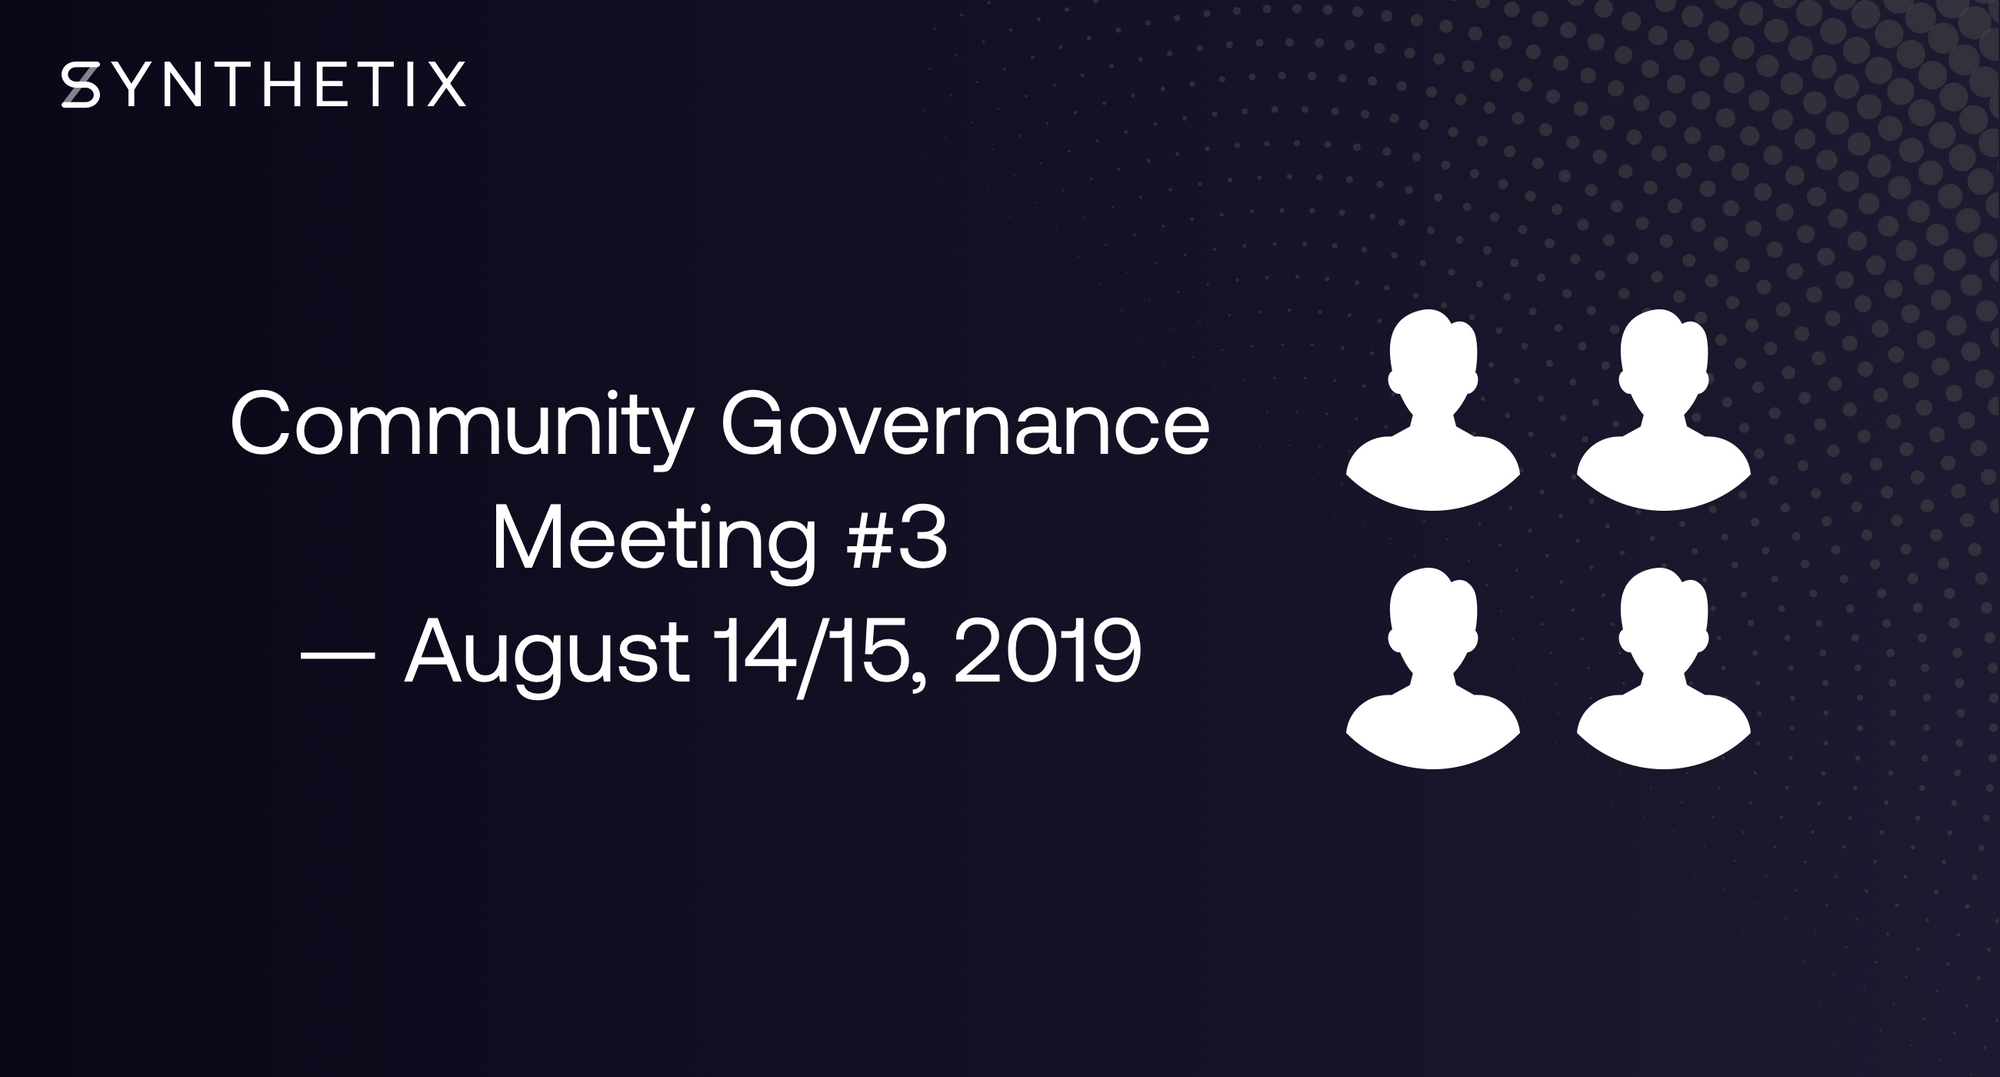 Come join the next community governance call on August 14/15!